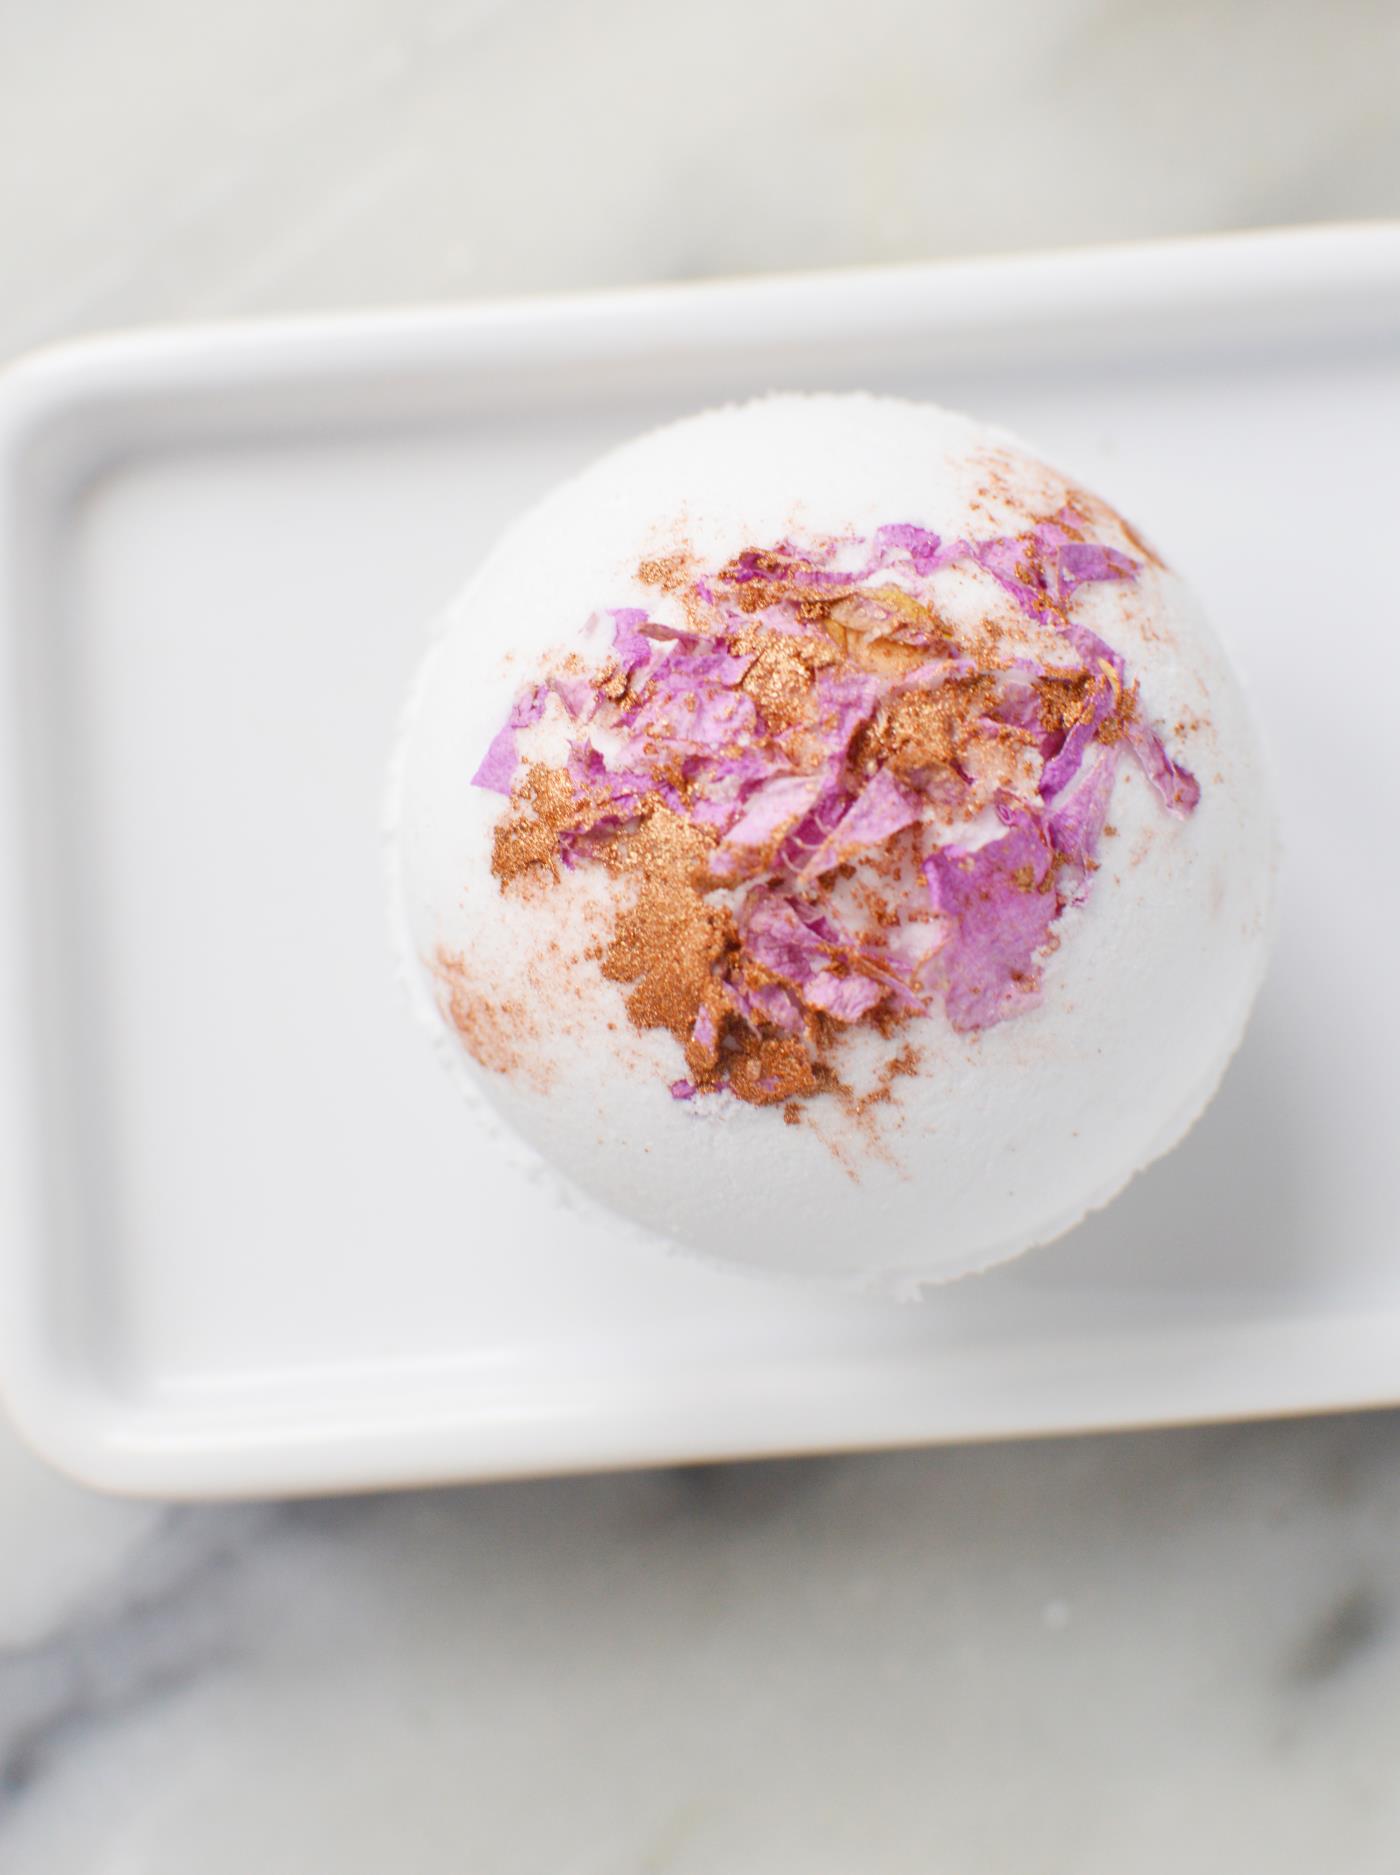 DIY Recipe: How to Make Rose Gold with Rose Petal Bath Bombs. Learn how to make easy fizzy bath bombs at home, great for gifts, your own home spa experience, or selling at the craft fair! This gorgeous rose gold dust and rose petal bath bomb will make you the most popular gift giver around! Recipe for kids to make fizzing bath bombs bathbombs.